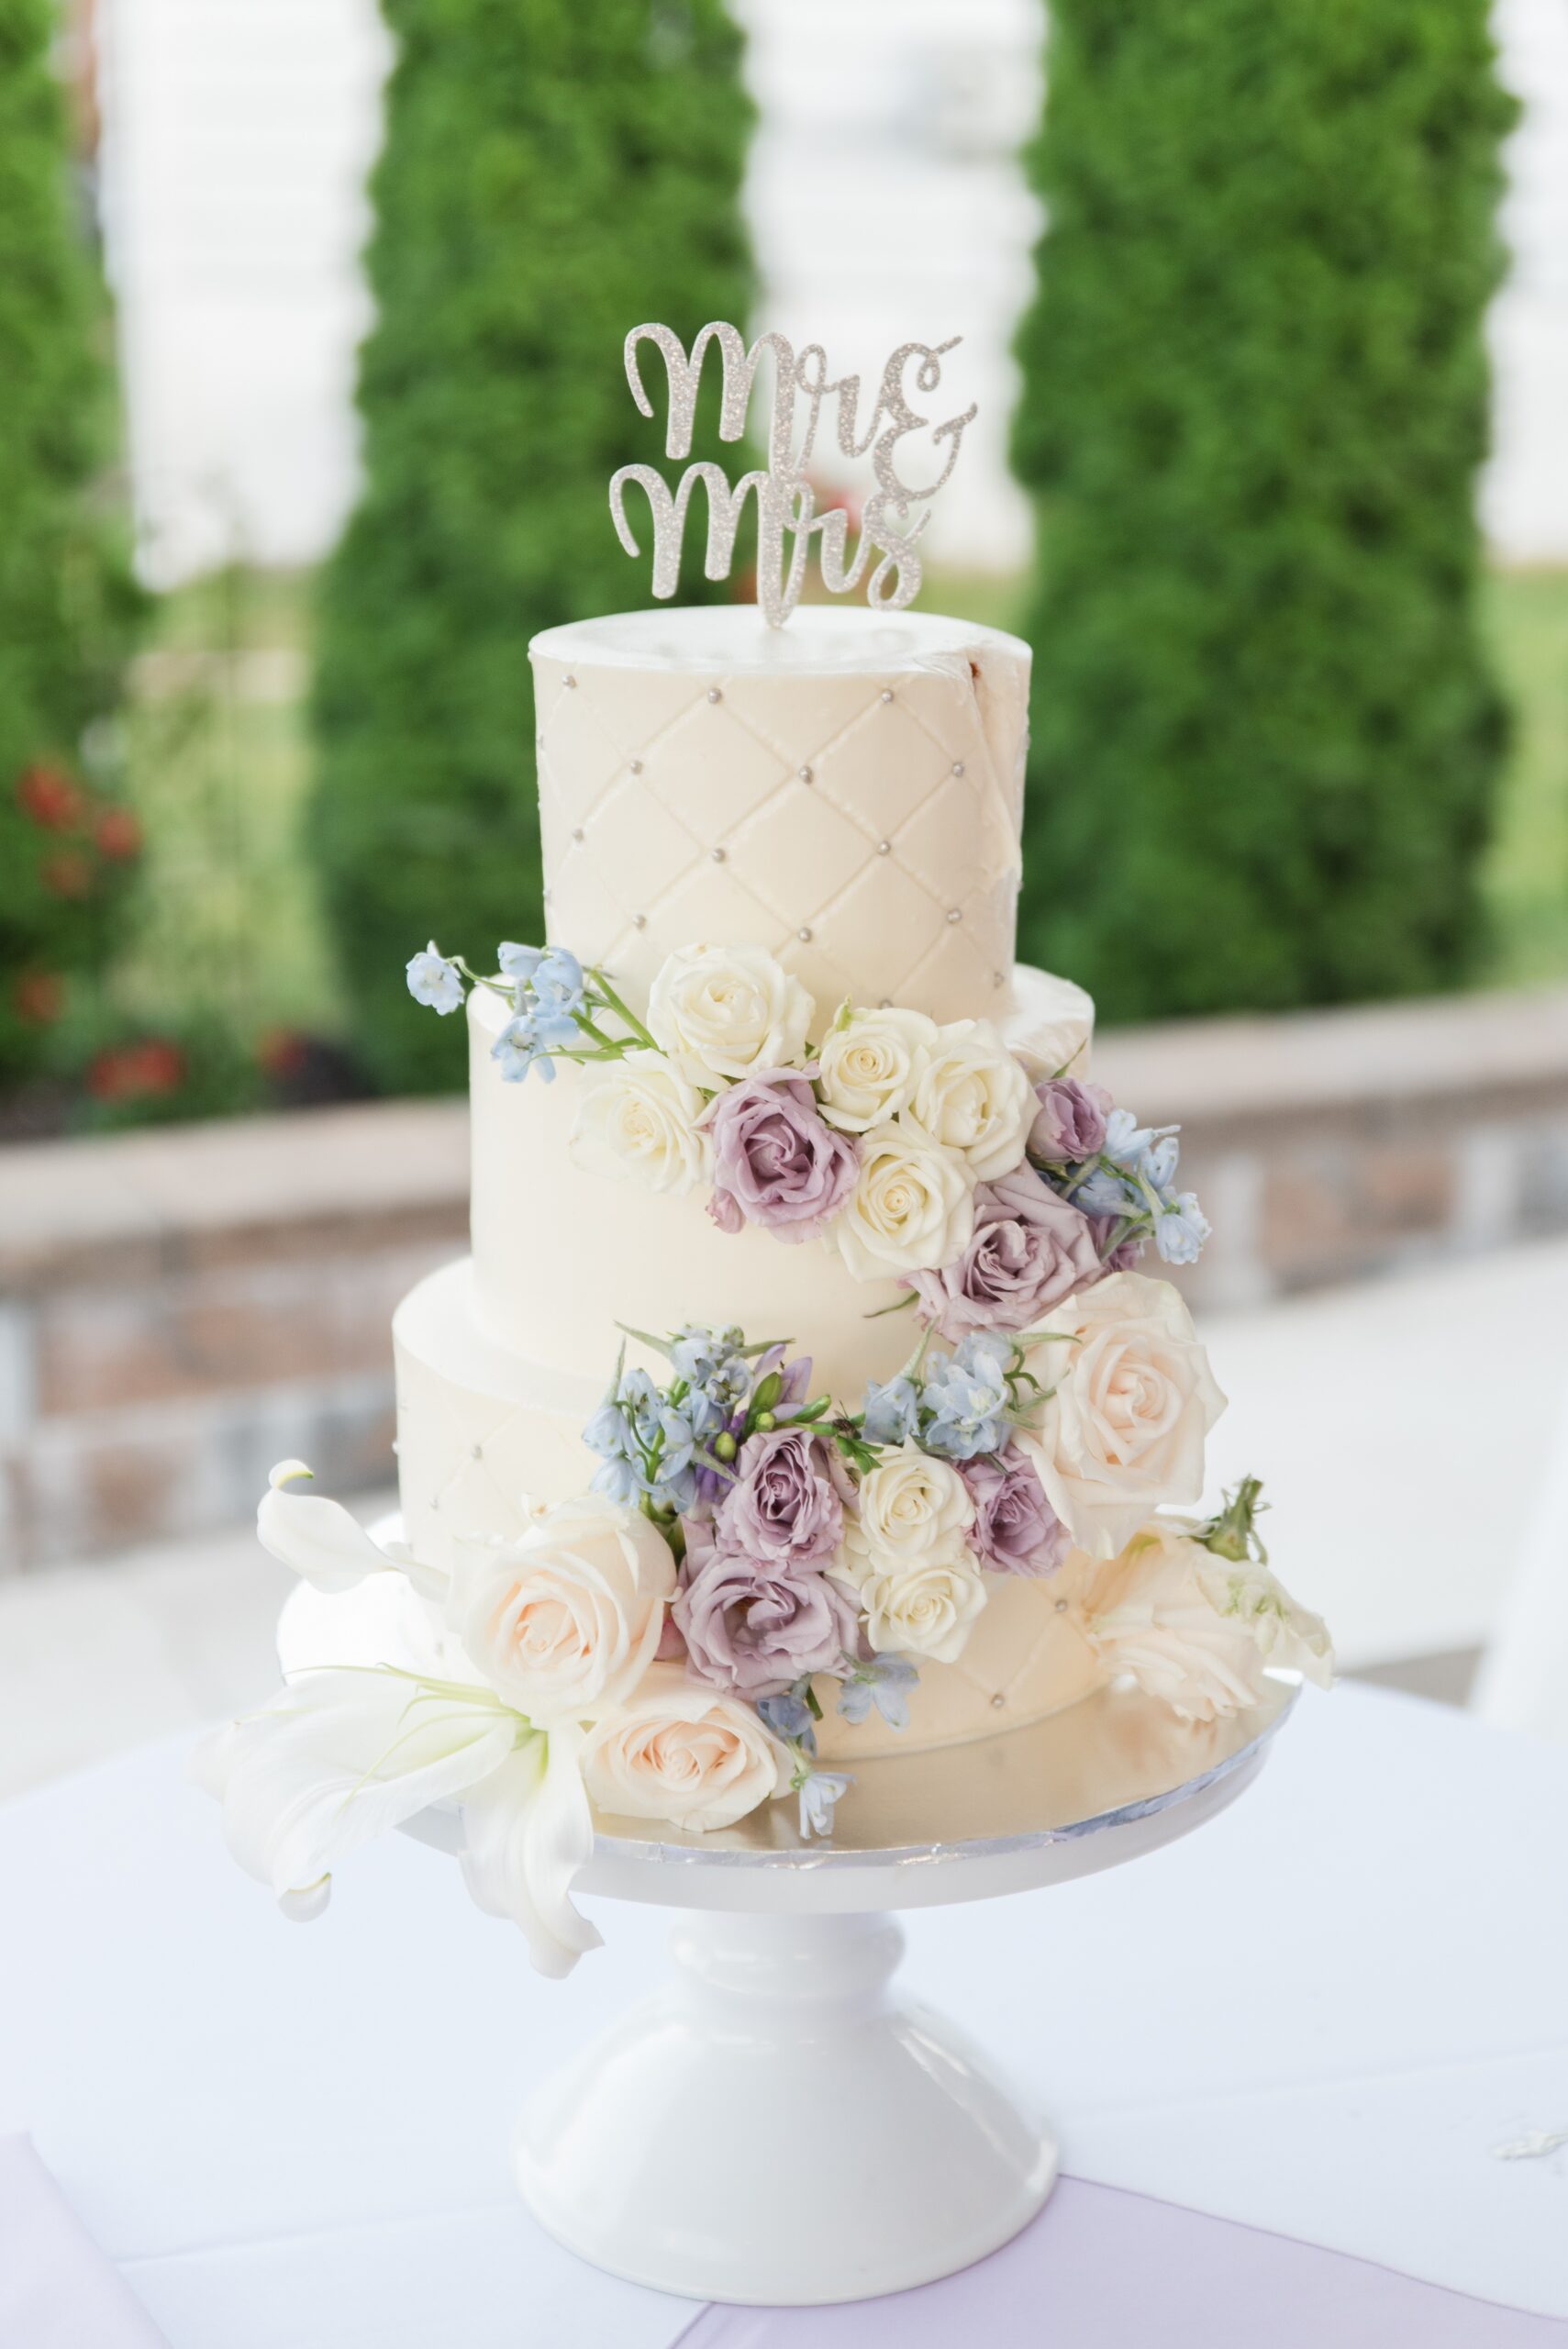 Details of a three tier wedding cake covered in roses